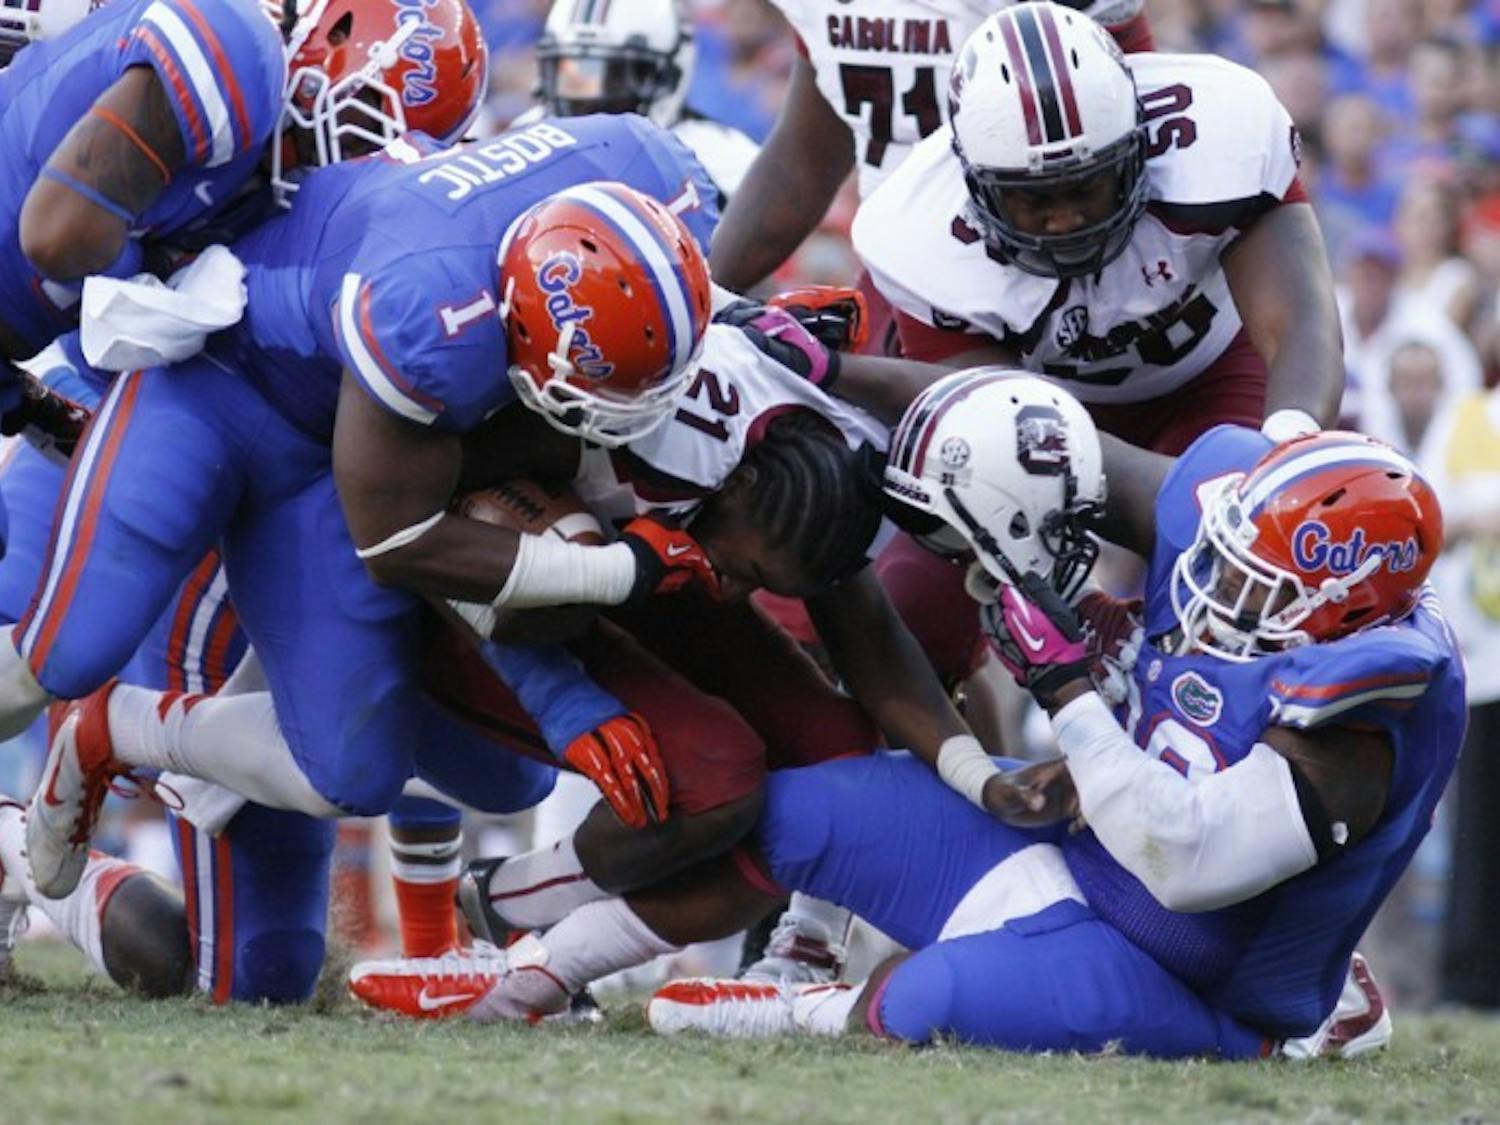 Defensive tackle Omar Hunter (right) rips off Marcus Lattimore’s helmet during Florida’s 44-11 win against South Carolina on Saturday at Ben Hill Griffin Stadium.&nbsp;